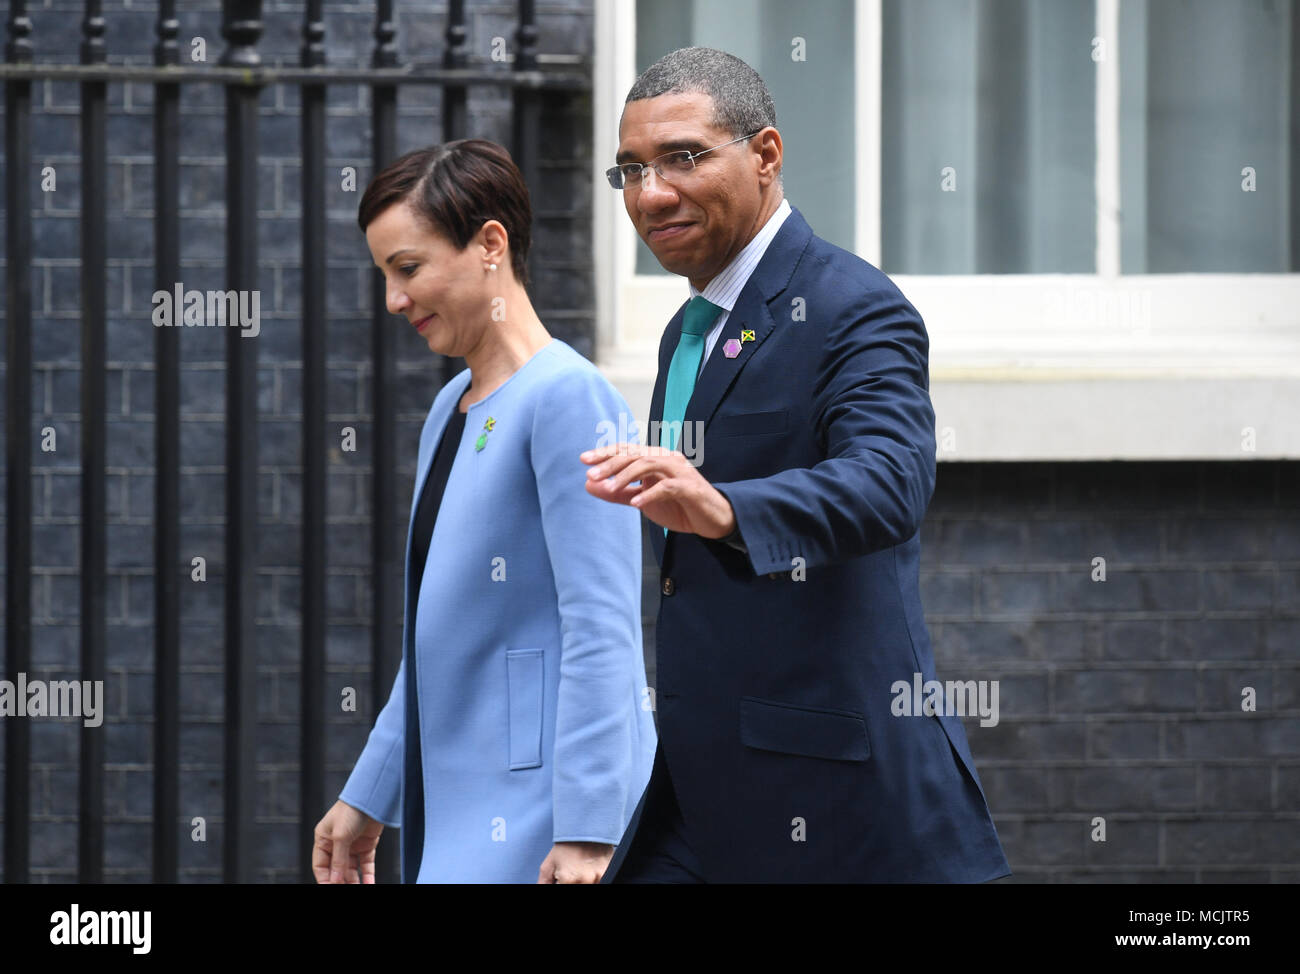 The Prime Minister of Jamaica Andrew Holness arriving in Downing Street ahead of talks with Prime Minister Theresa May, Commonwealth leaders, Foreign Ministers and High Commissioners in relation to the Windrush generation immigration controversy. Stock Photo